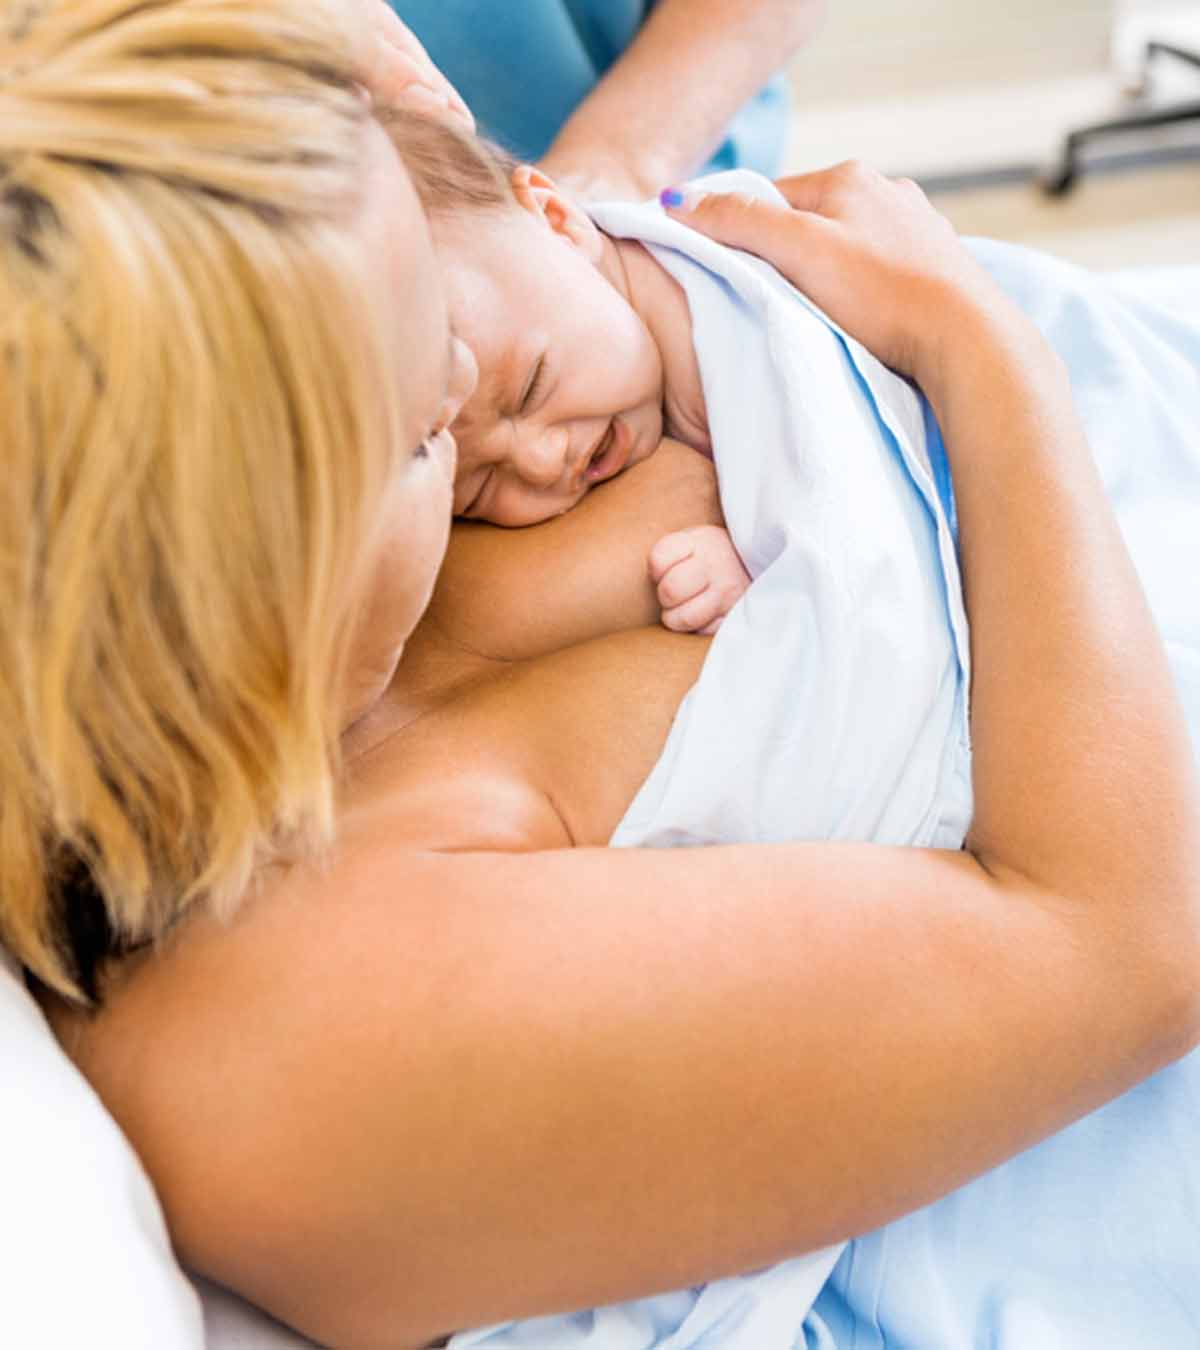 For Baby And Mom, That First Hour After Birth Matters